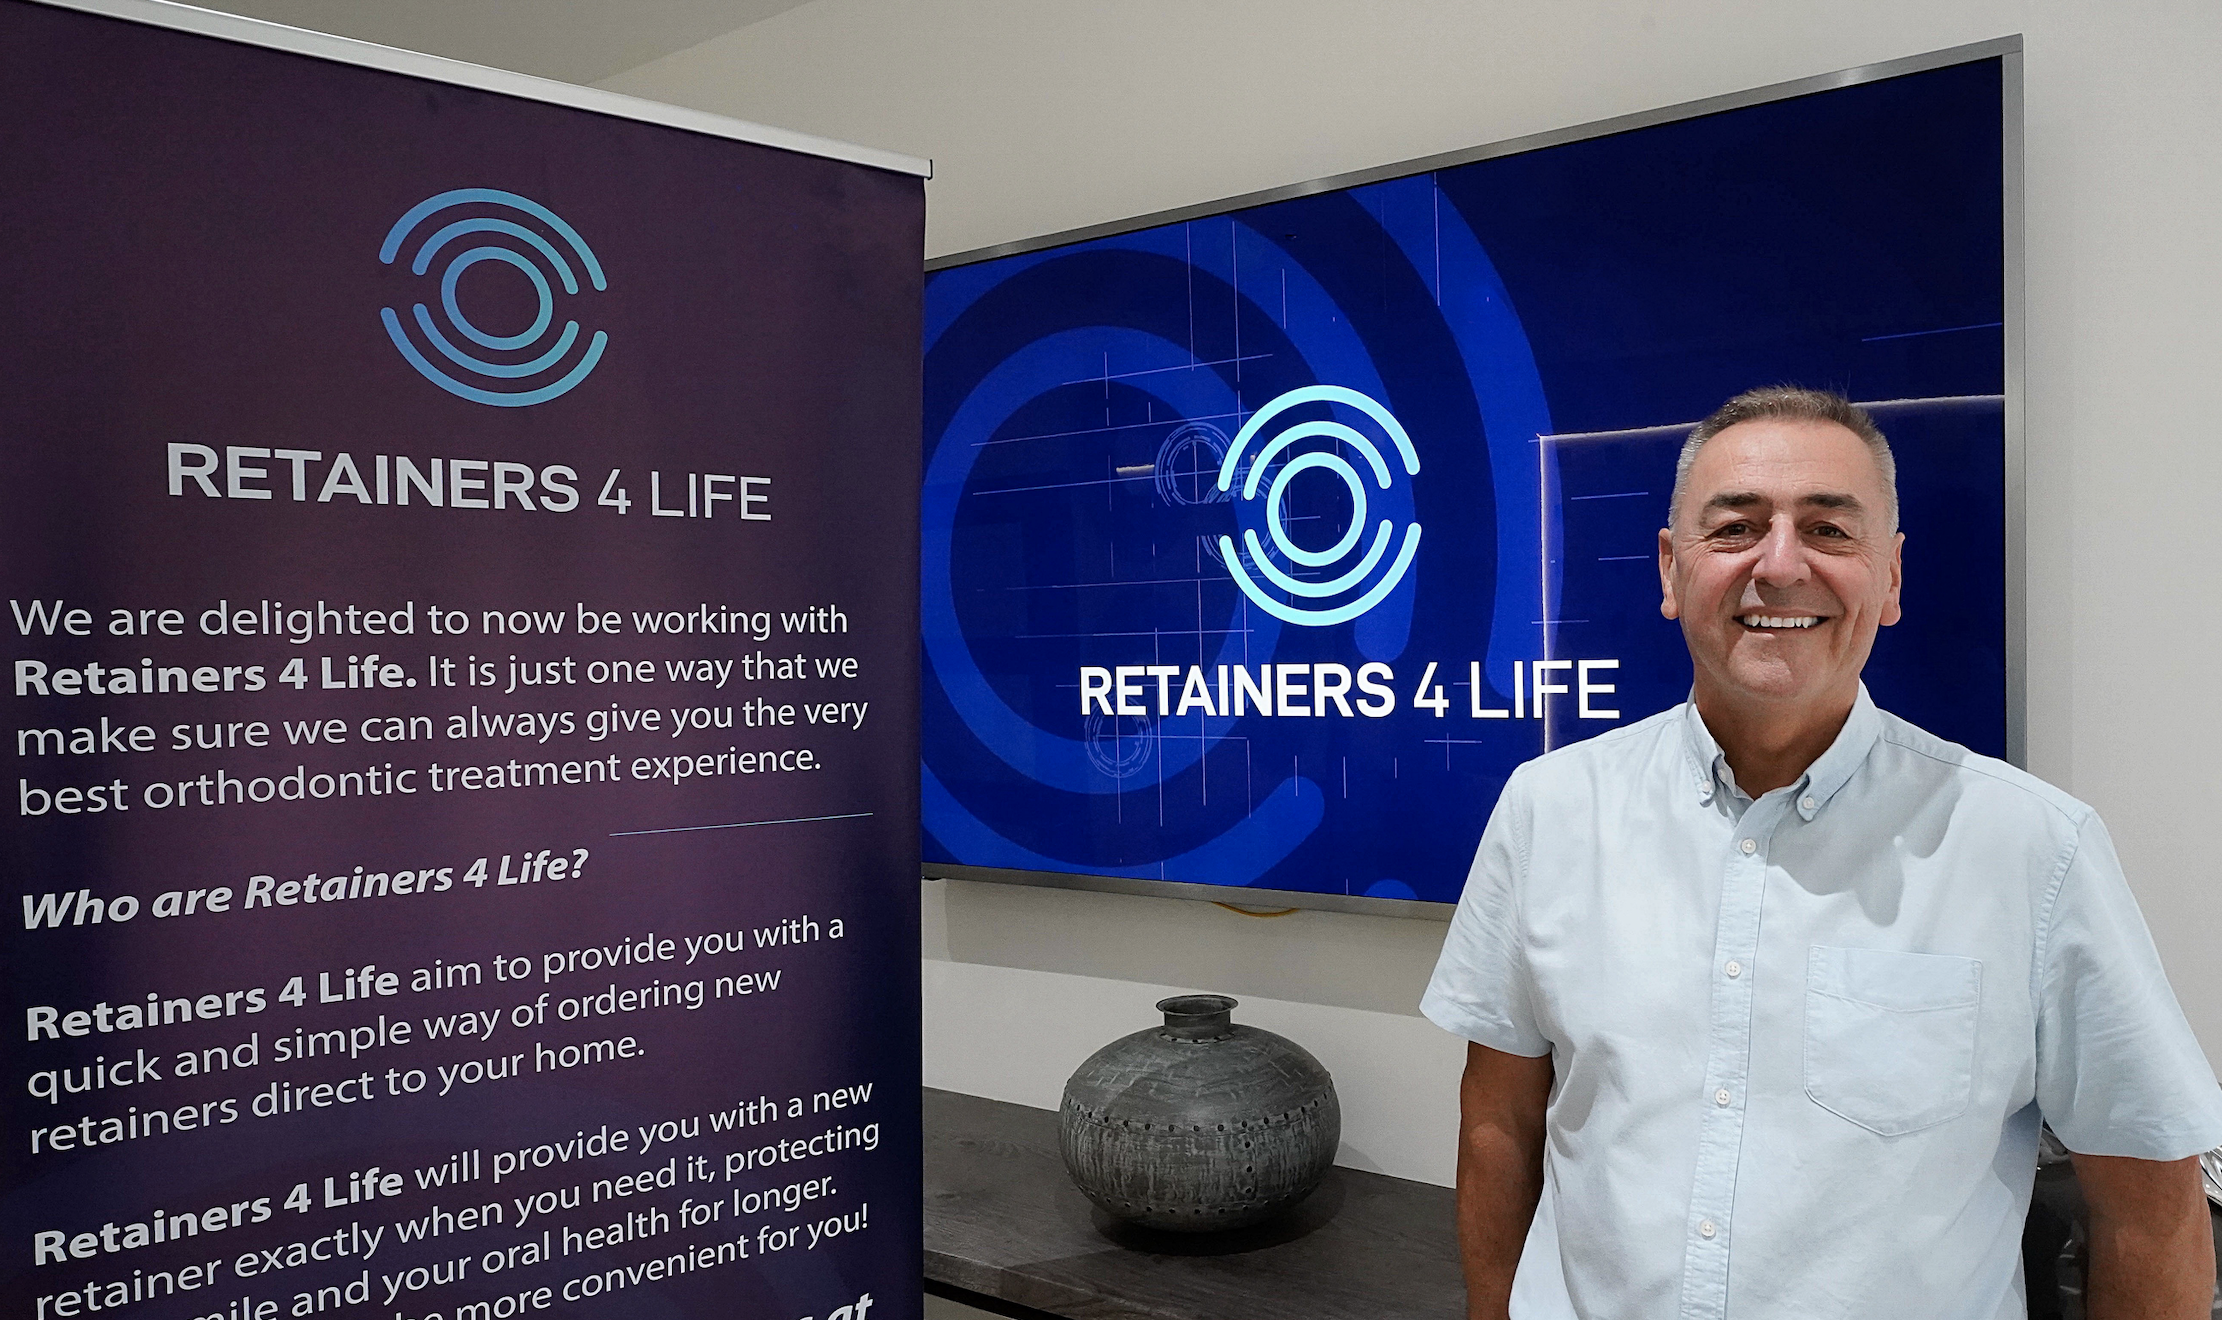 Sean Thompson, the founder of multi-award winning Ashford Orthodontics, has been appointed CEO of Retainers 4 Life.